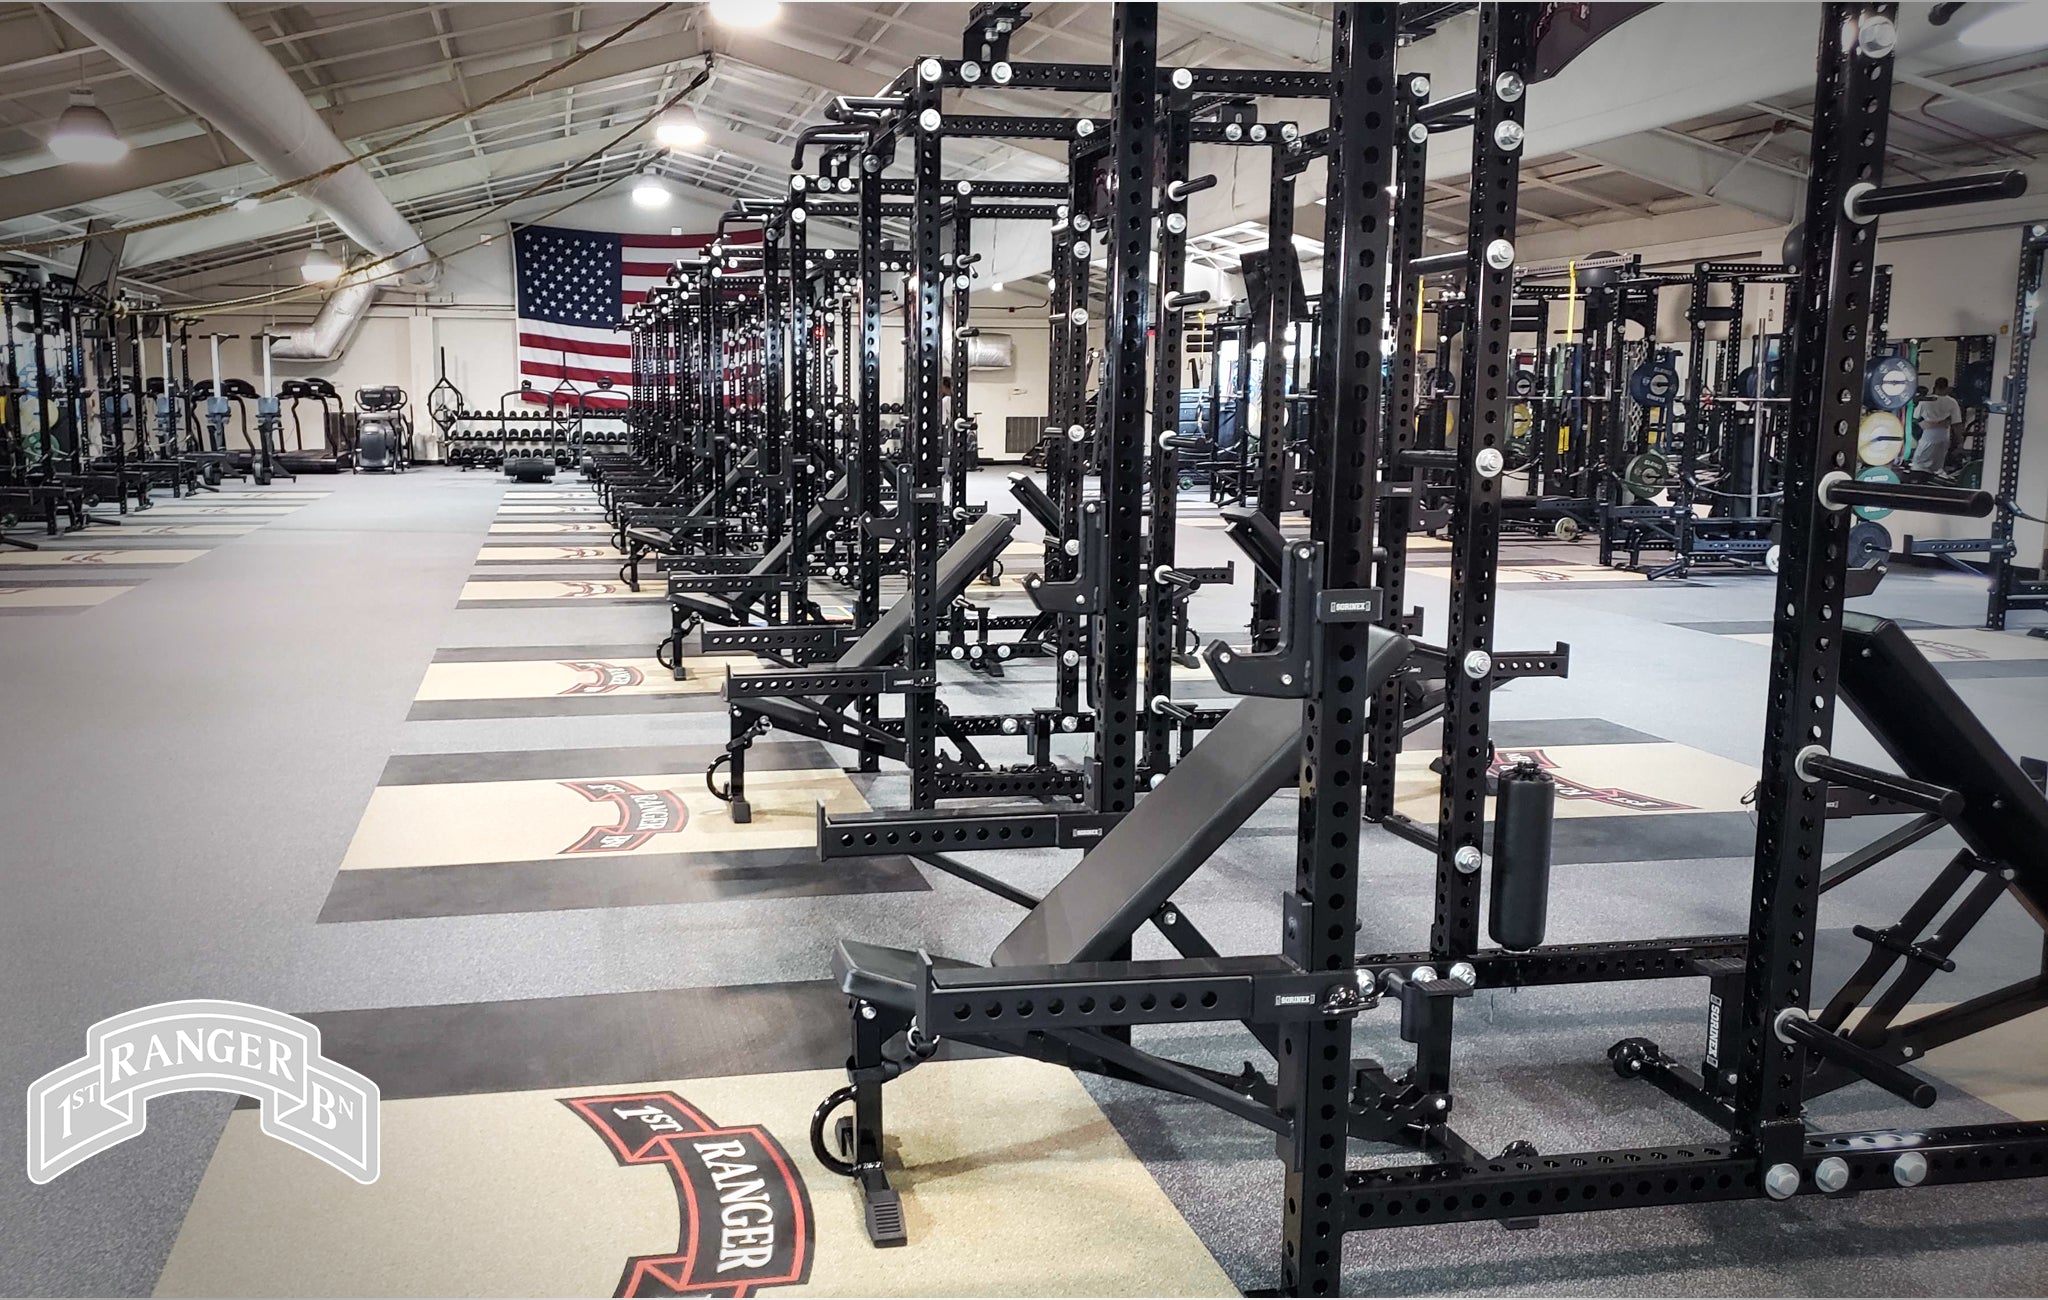 1/75th rangers Sorinex strength and conditioning facility